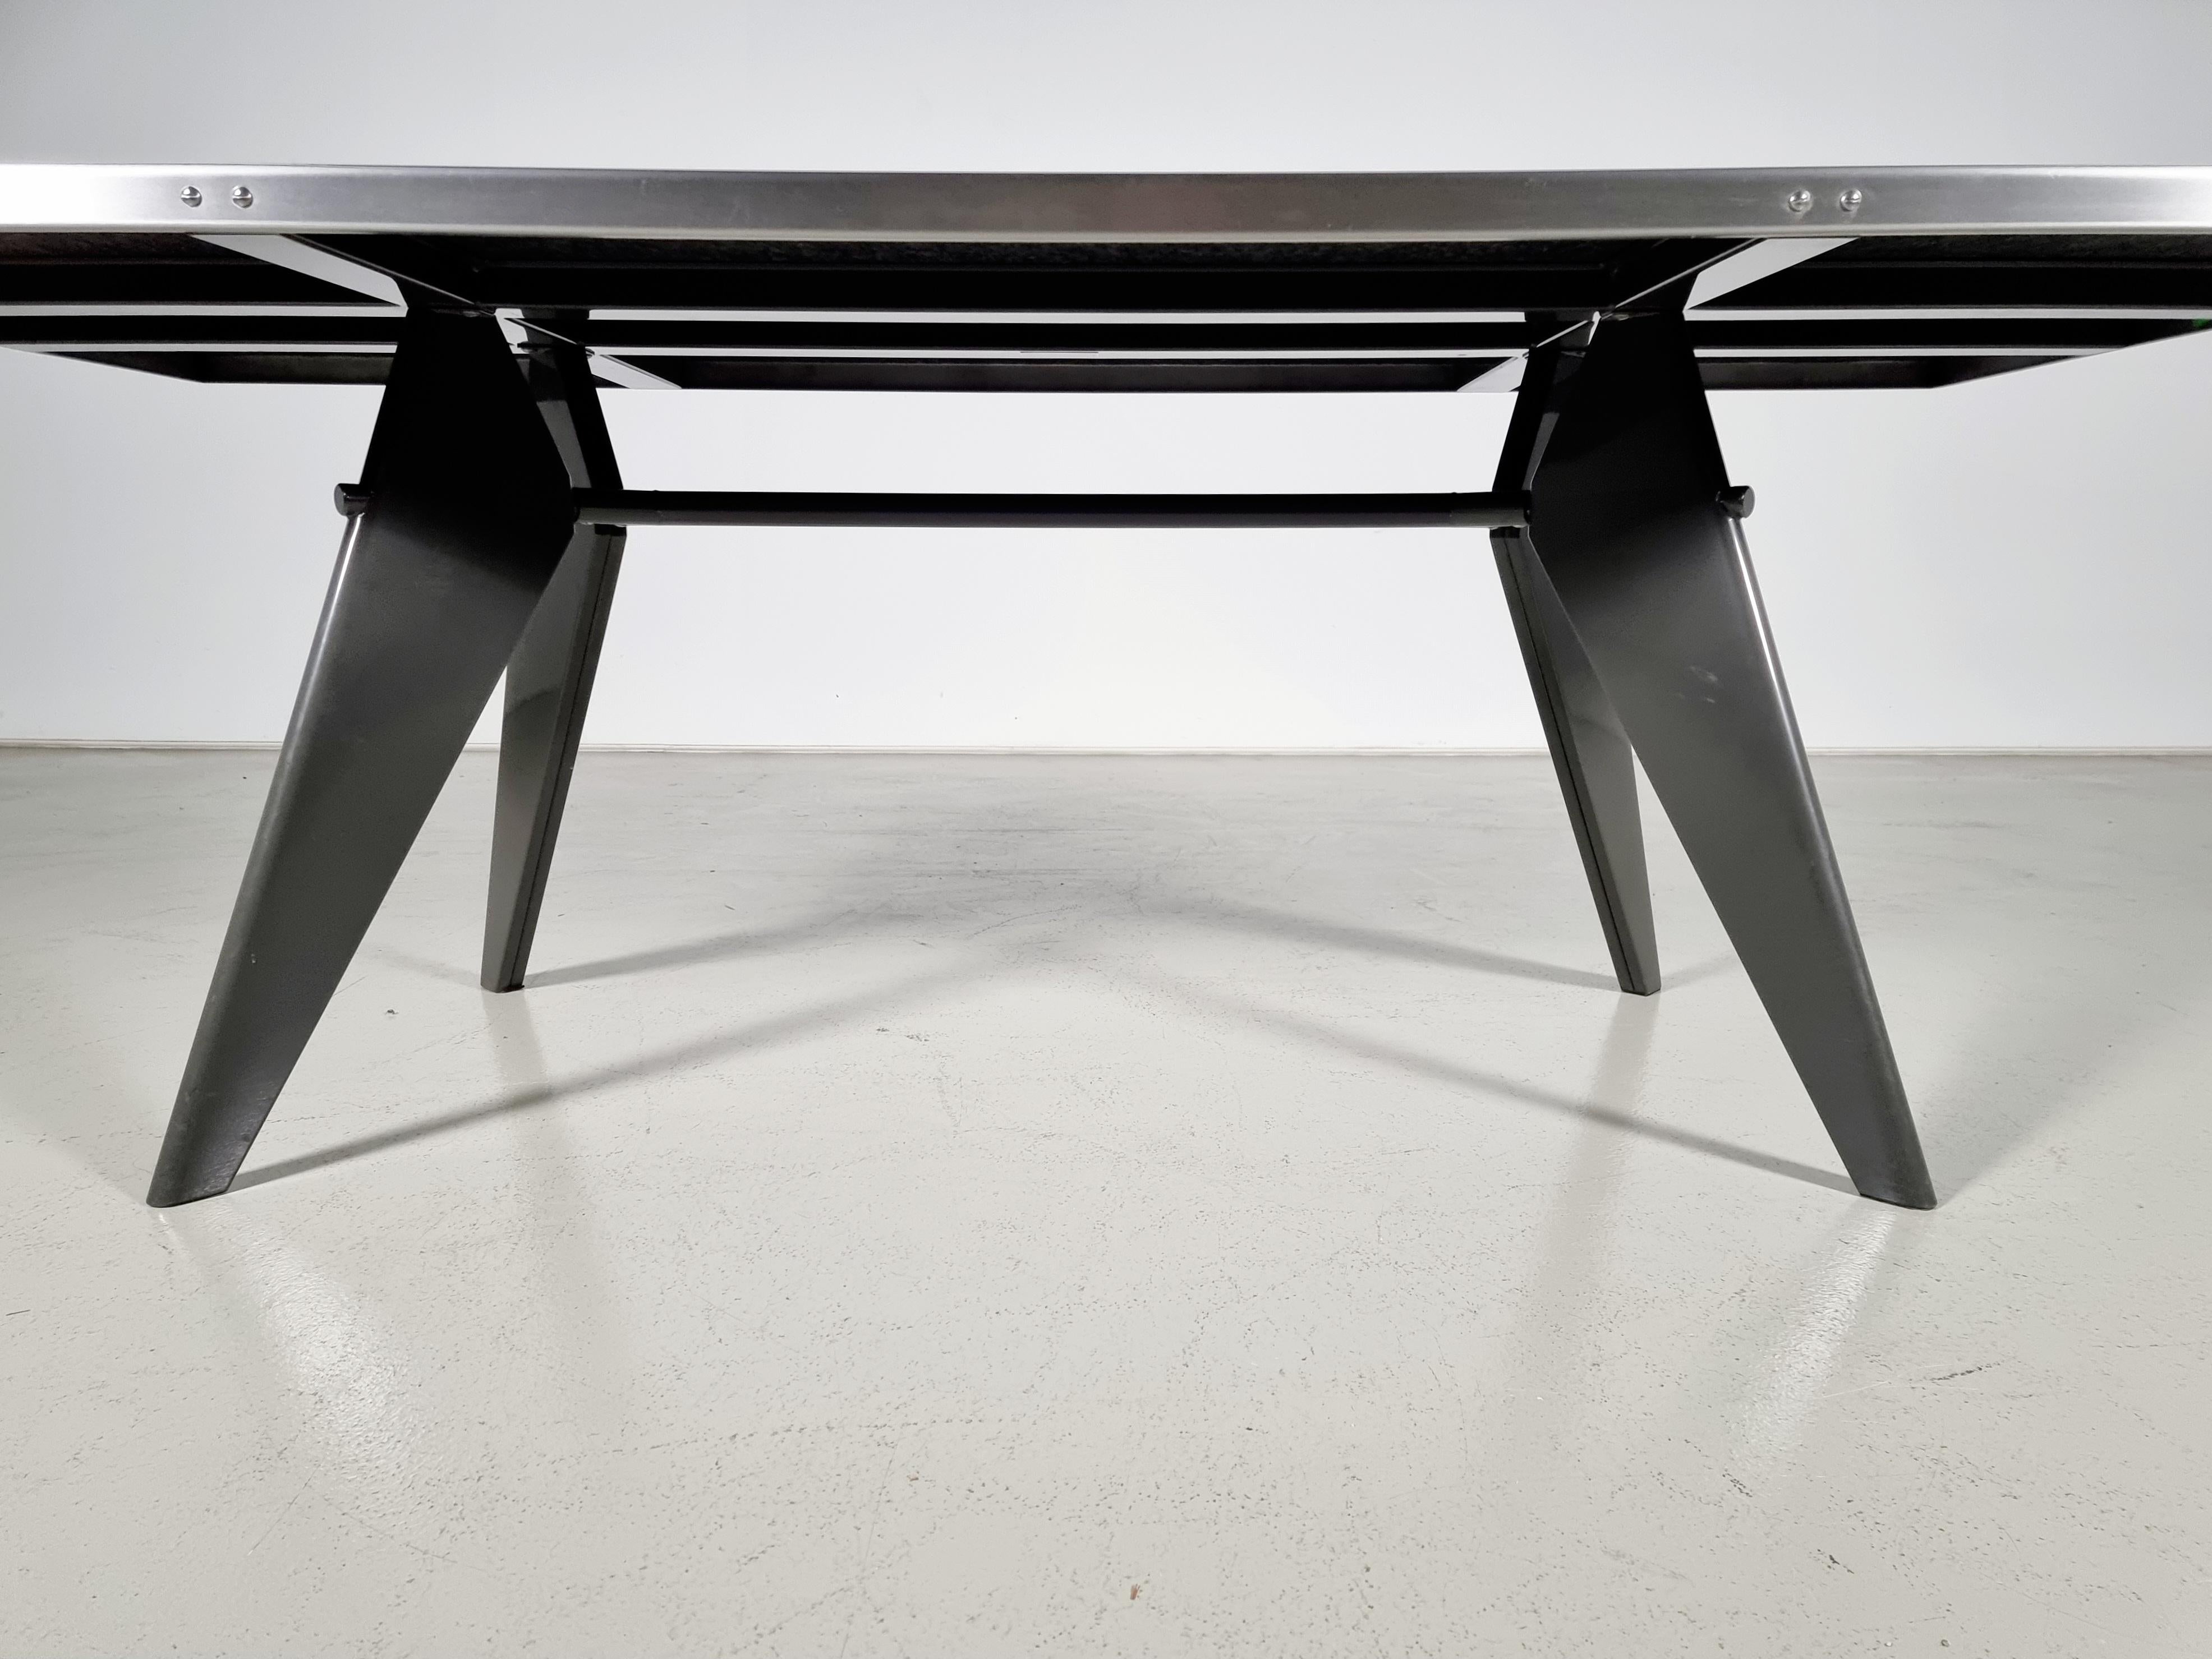 Jean Prouve by G-Star Raw for Vitra S.A.M. Tropique Table with matching chairs For Sale 5